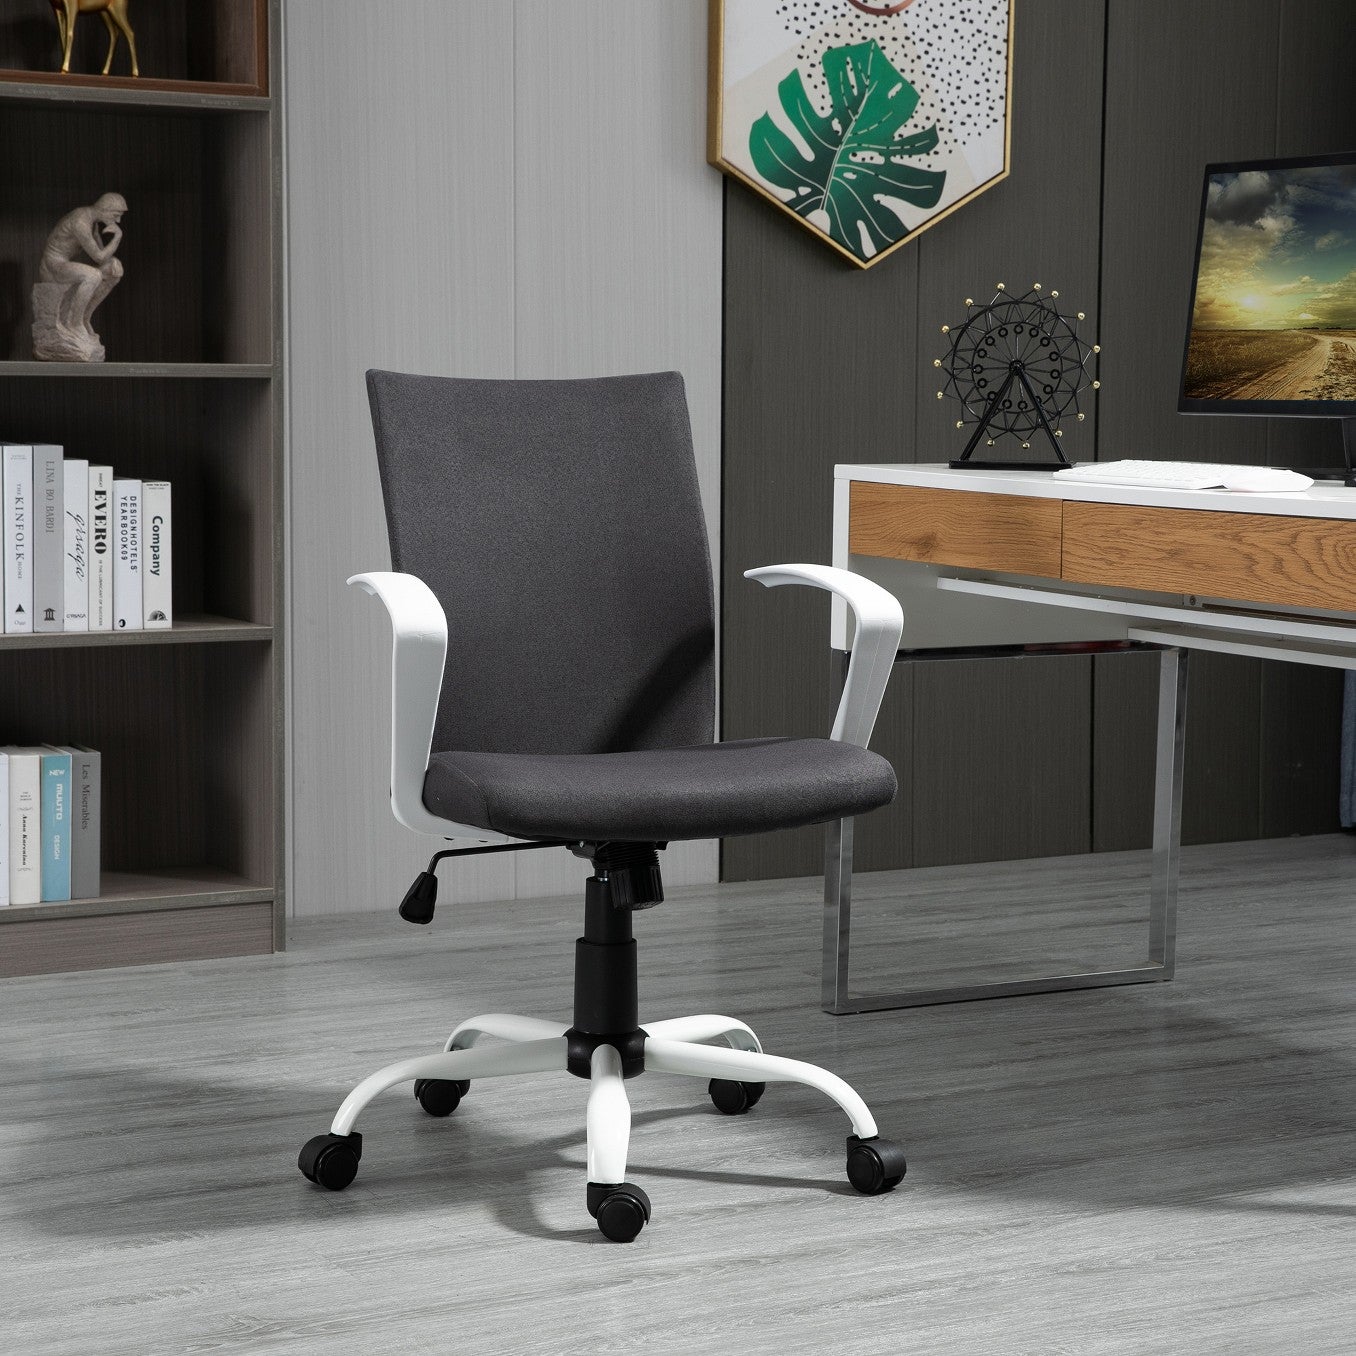 The 10 Best Home Office Chairs Under $100 to Comfortably Work From Home